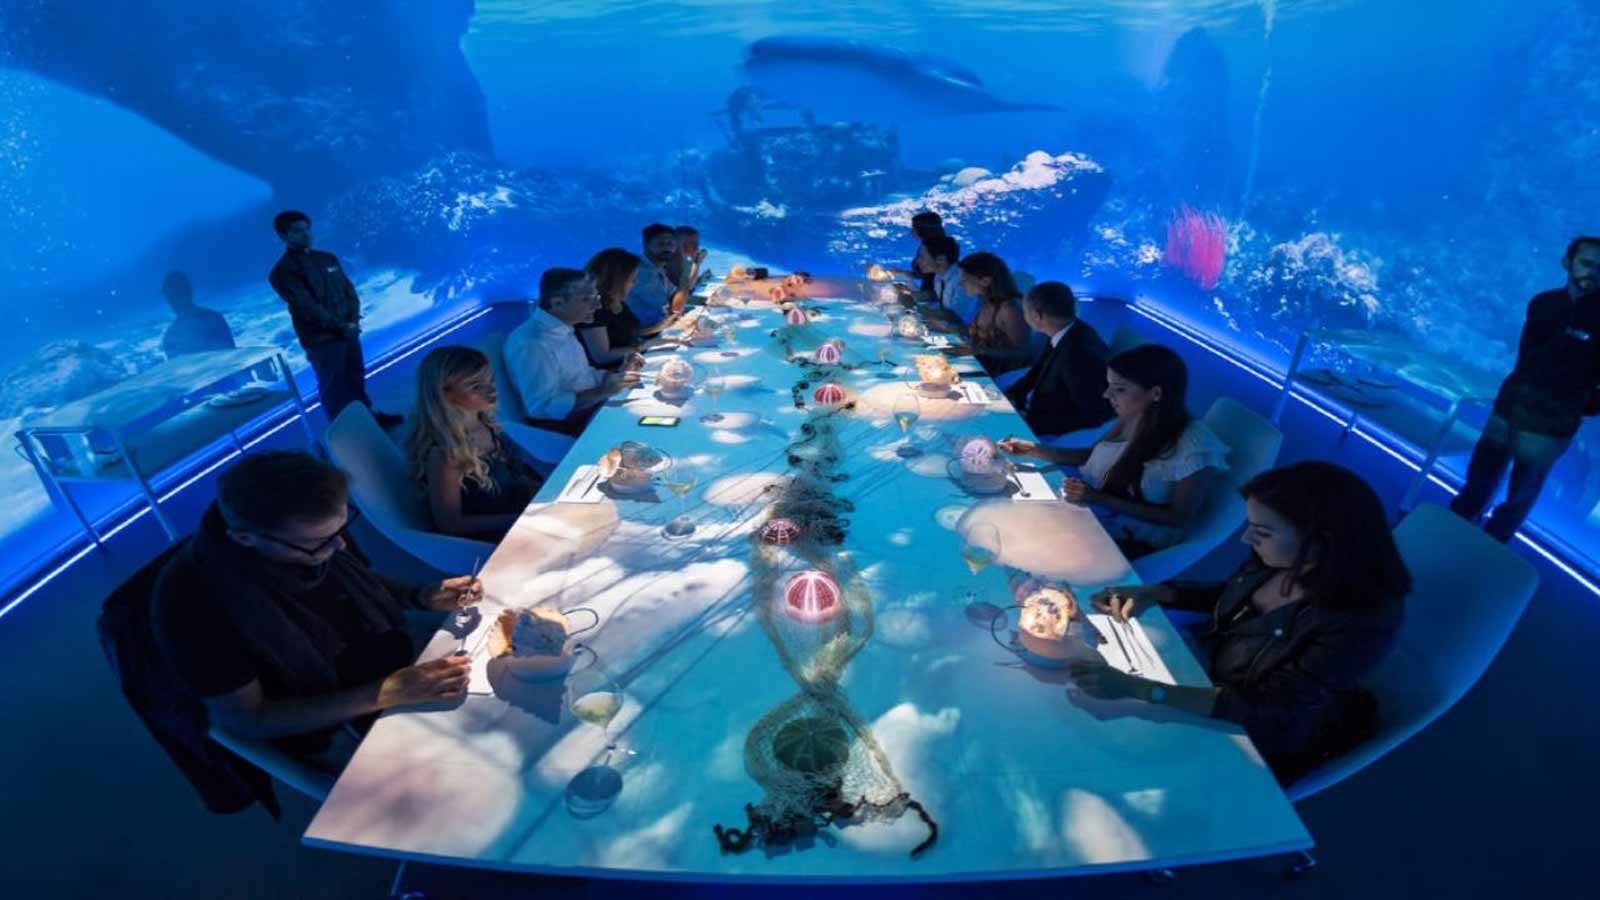 Take A Sneak Peek Inside Sublimotion, The World’s Most Expensive Restaurant